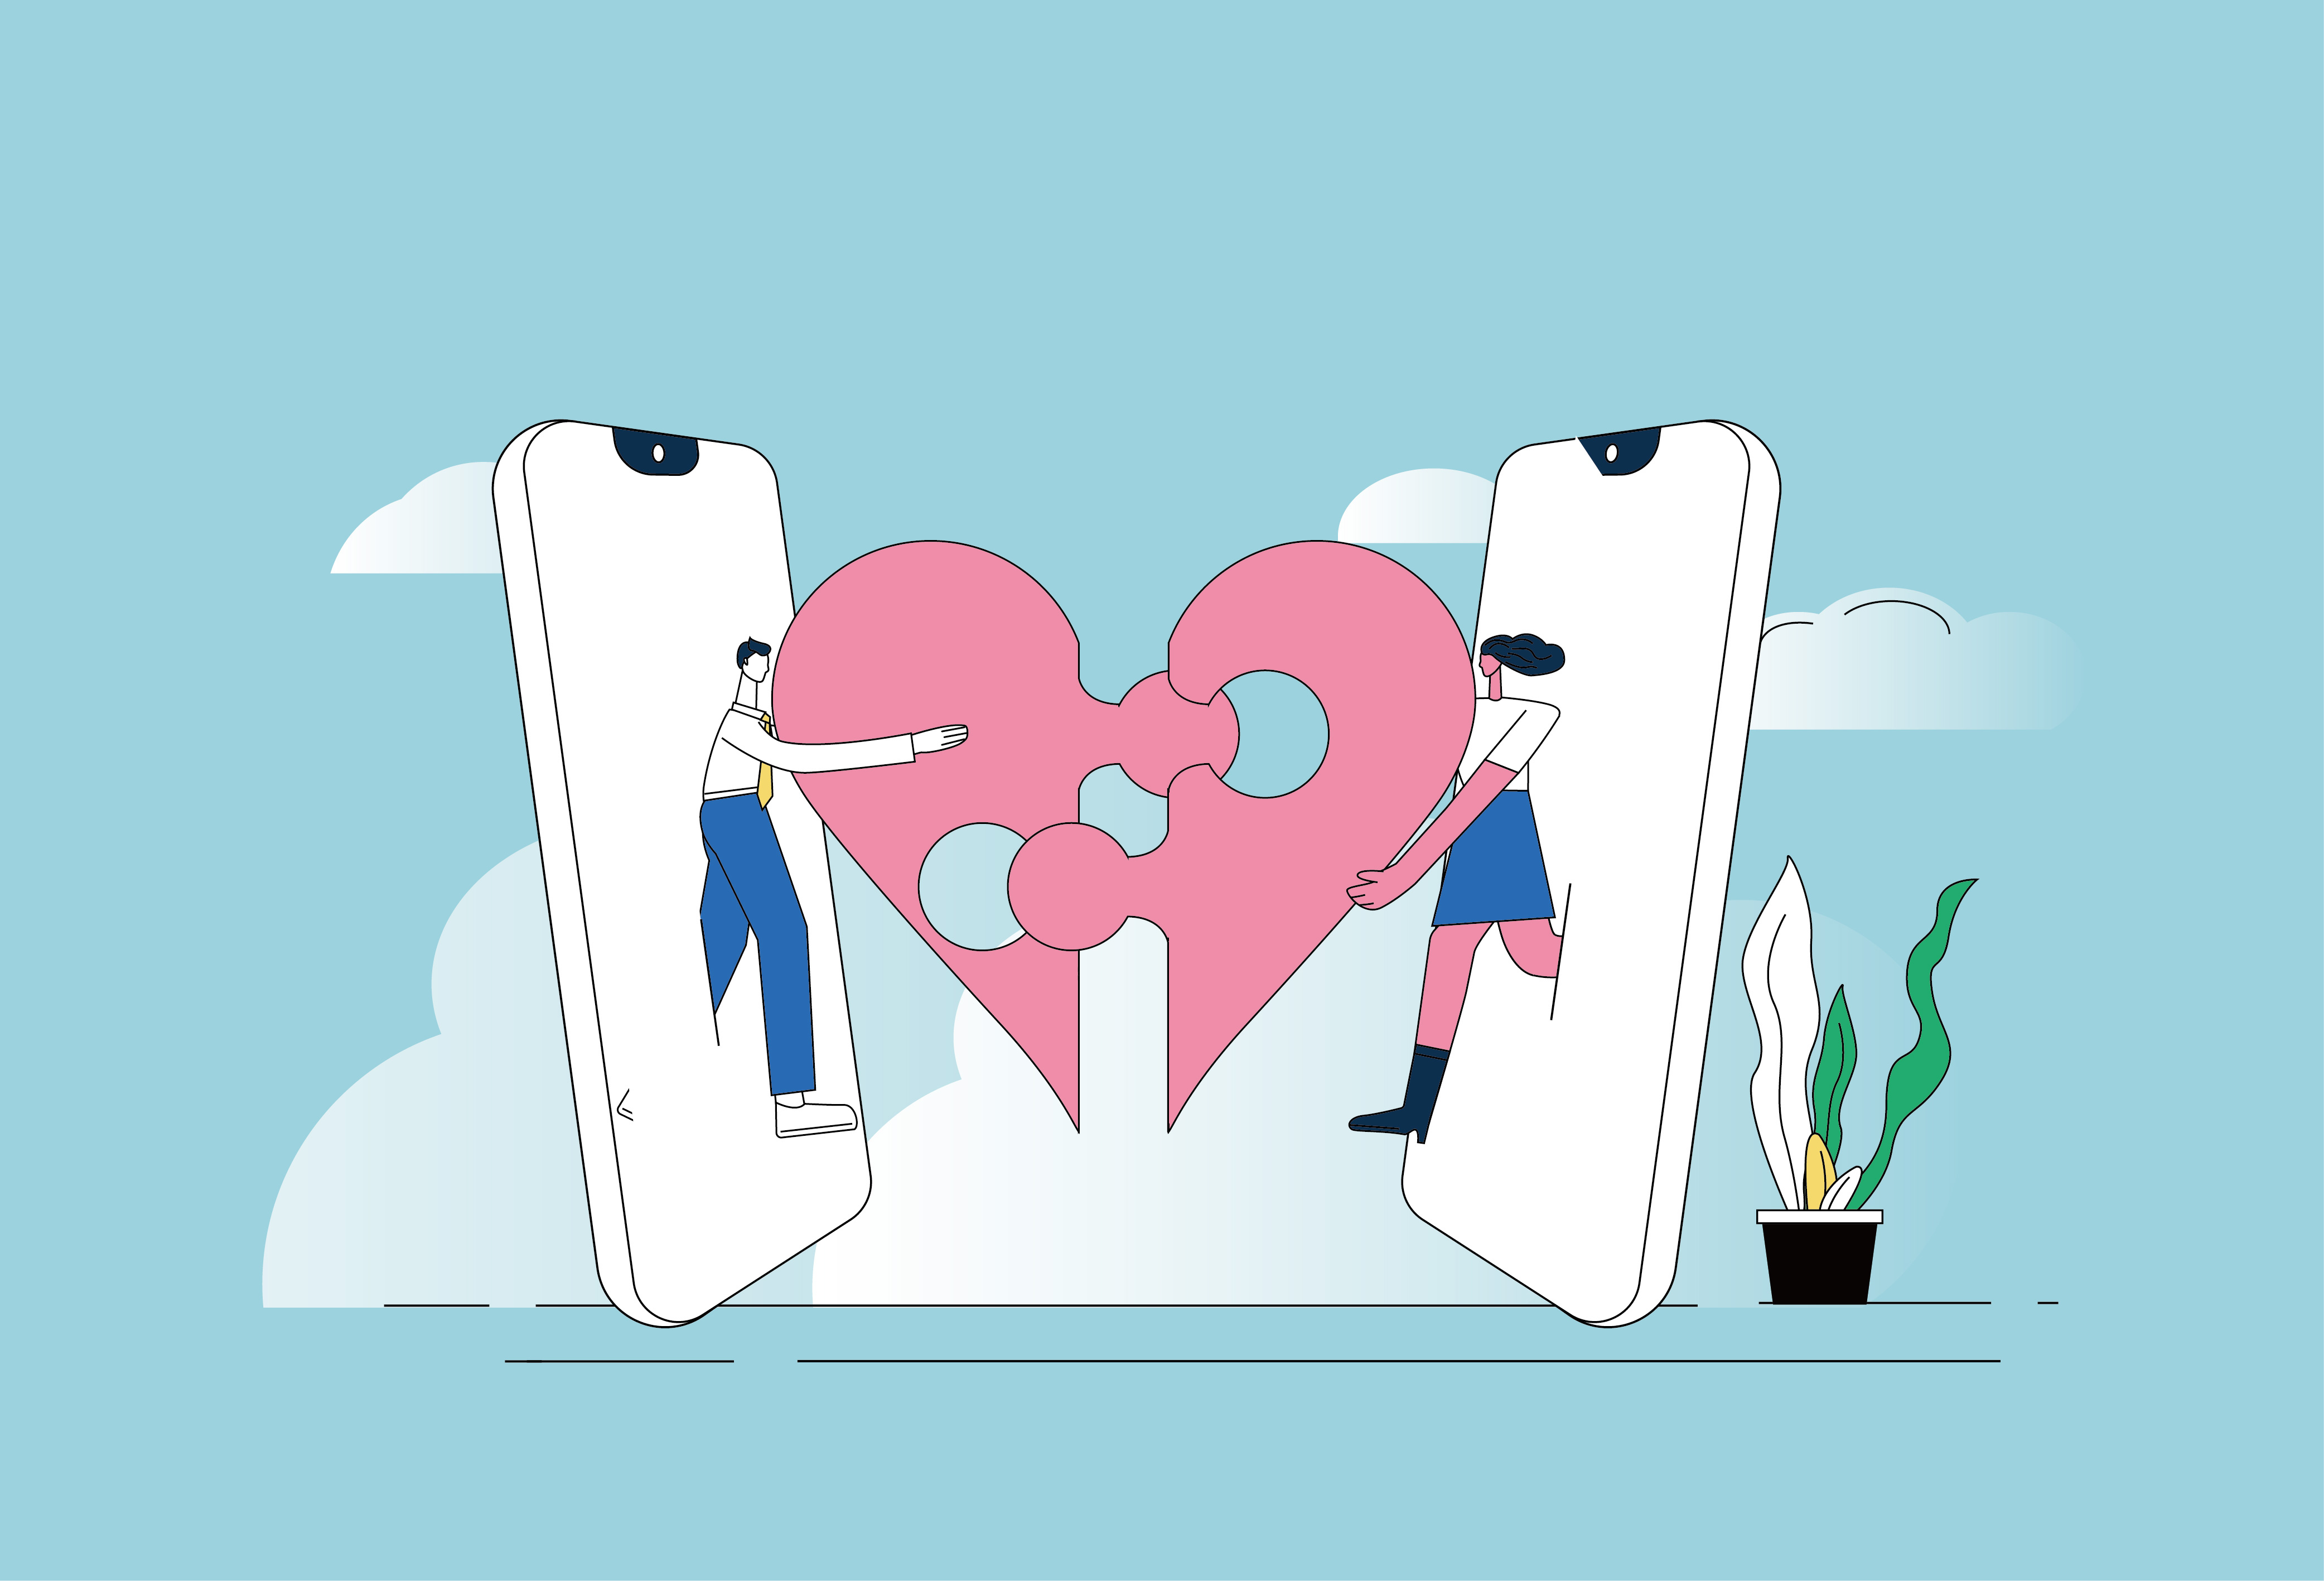 An illustration of a male figure walking out of a large smartphone screen holding half of a puzzle piece shaped like a heart. He reaches toward a woman across from him who is holding the other half of the heart puzzle piece. She also emerges from a smartphone screen.